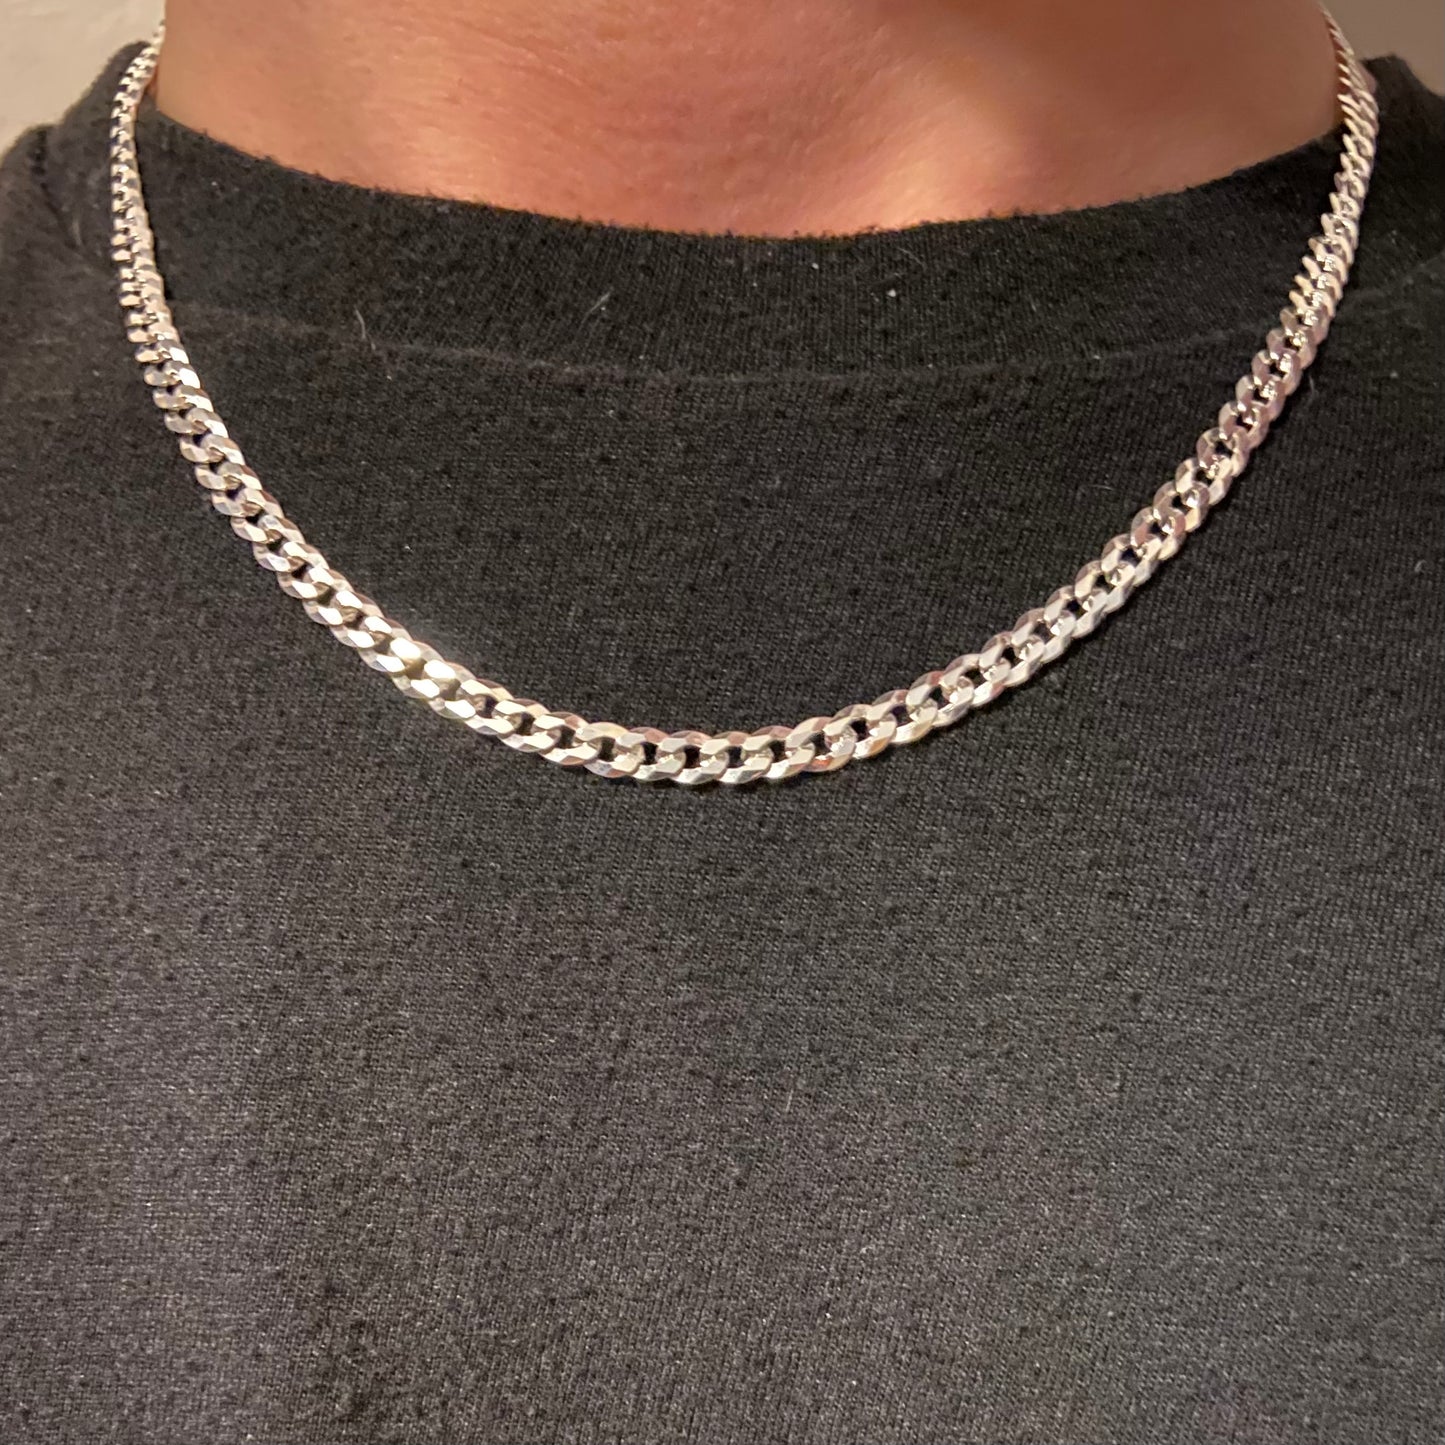 Solid Silver Cuban Link Chain 18in 4mm